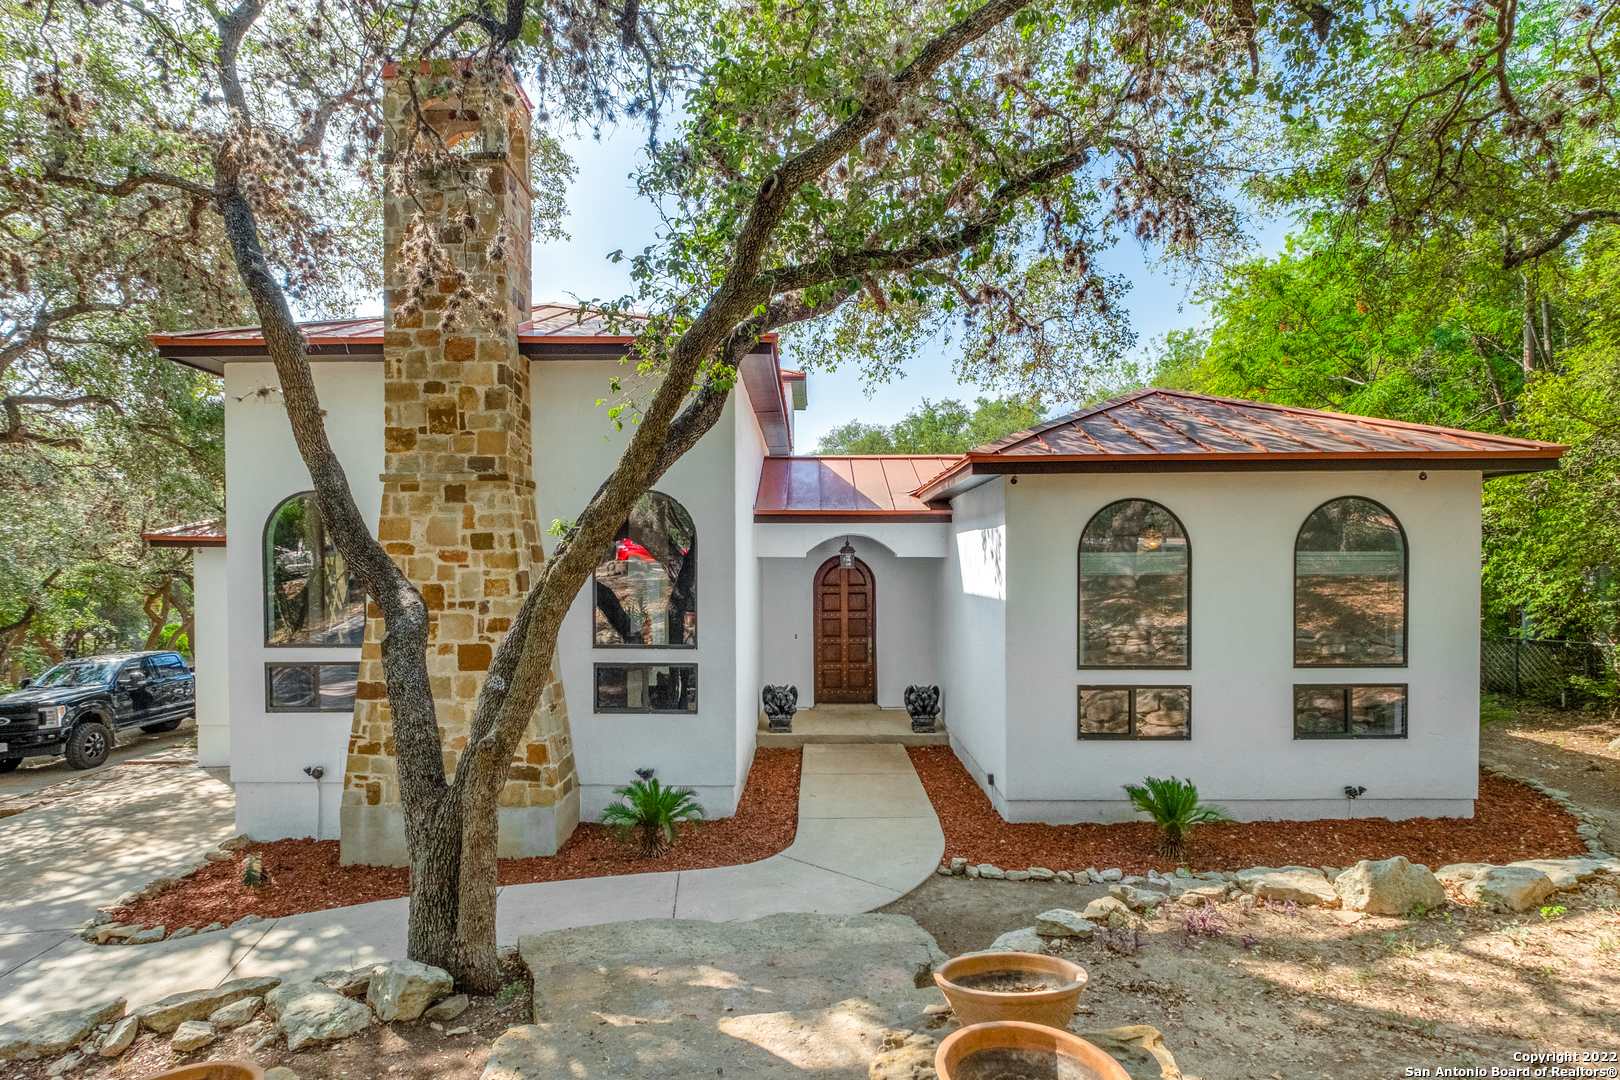 This beautifully renovated custom-built 4,147sqft home offers one-of-a-kind features that you will fall in love with and a kitchen that must be seen! Situated on a half-acre in a quiet neighborhood filled with mature trees, you'll enter through a hand carved mahogany front door into an atrium with in-lay flooring looking into a courtyard. To your left you'll find the first of multiple living areas with tall windows and a fireplace over 6 feet tall. You'll continue into the dining room, butler's pantry, and then a chef's dream with Thermador and Miele appliances, a leathered granite island, and plentiful cabinetry and countertops. You'll continue to another living area with white oak flooring and up a mahogany staircase to two upstairs bedrooms. The right wing of the home consists of a cathedral ceiling guestroom and primary bedroom with a 25ft long ensuite bathroom. There are simply too many features to describe here. Schedule your tour quickly!